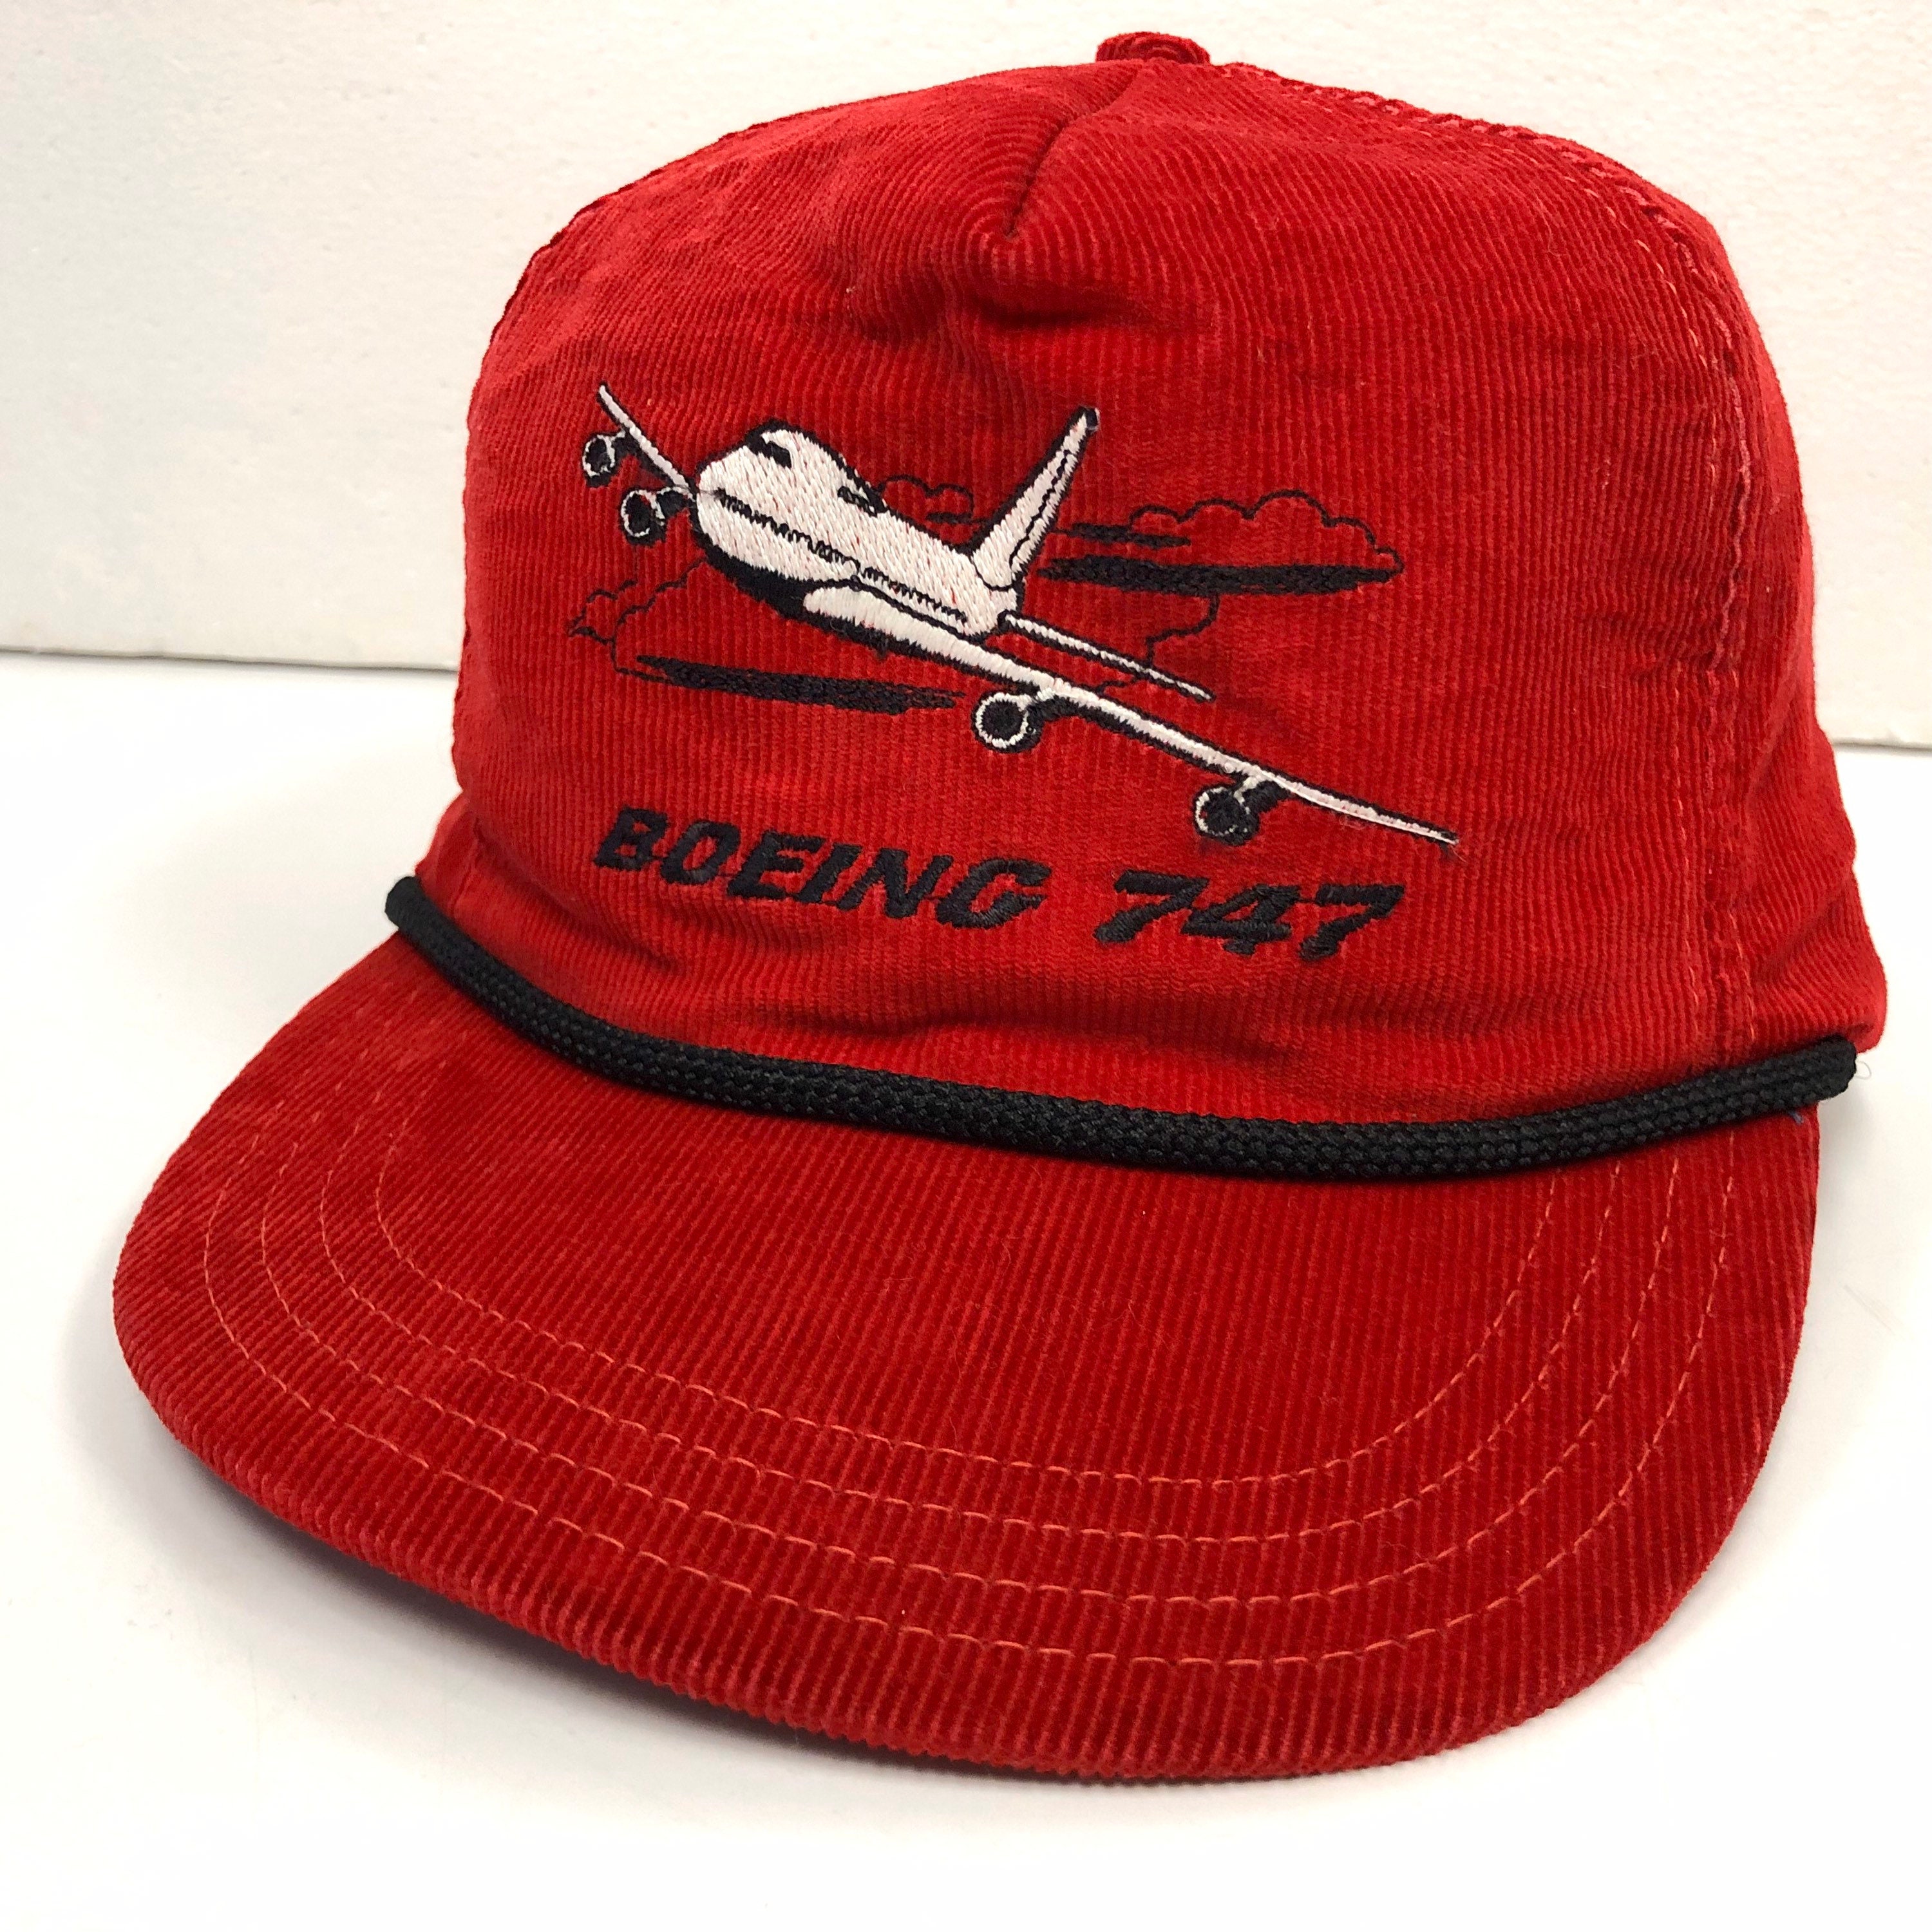 Nos Vintage 70-80's Ram Action Men Red Corduroy Trucker Hat Boeing 747 Air Plane Snapback Cord Cap Usa Made